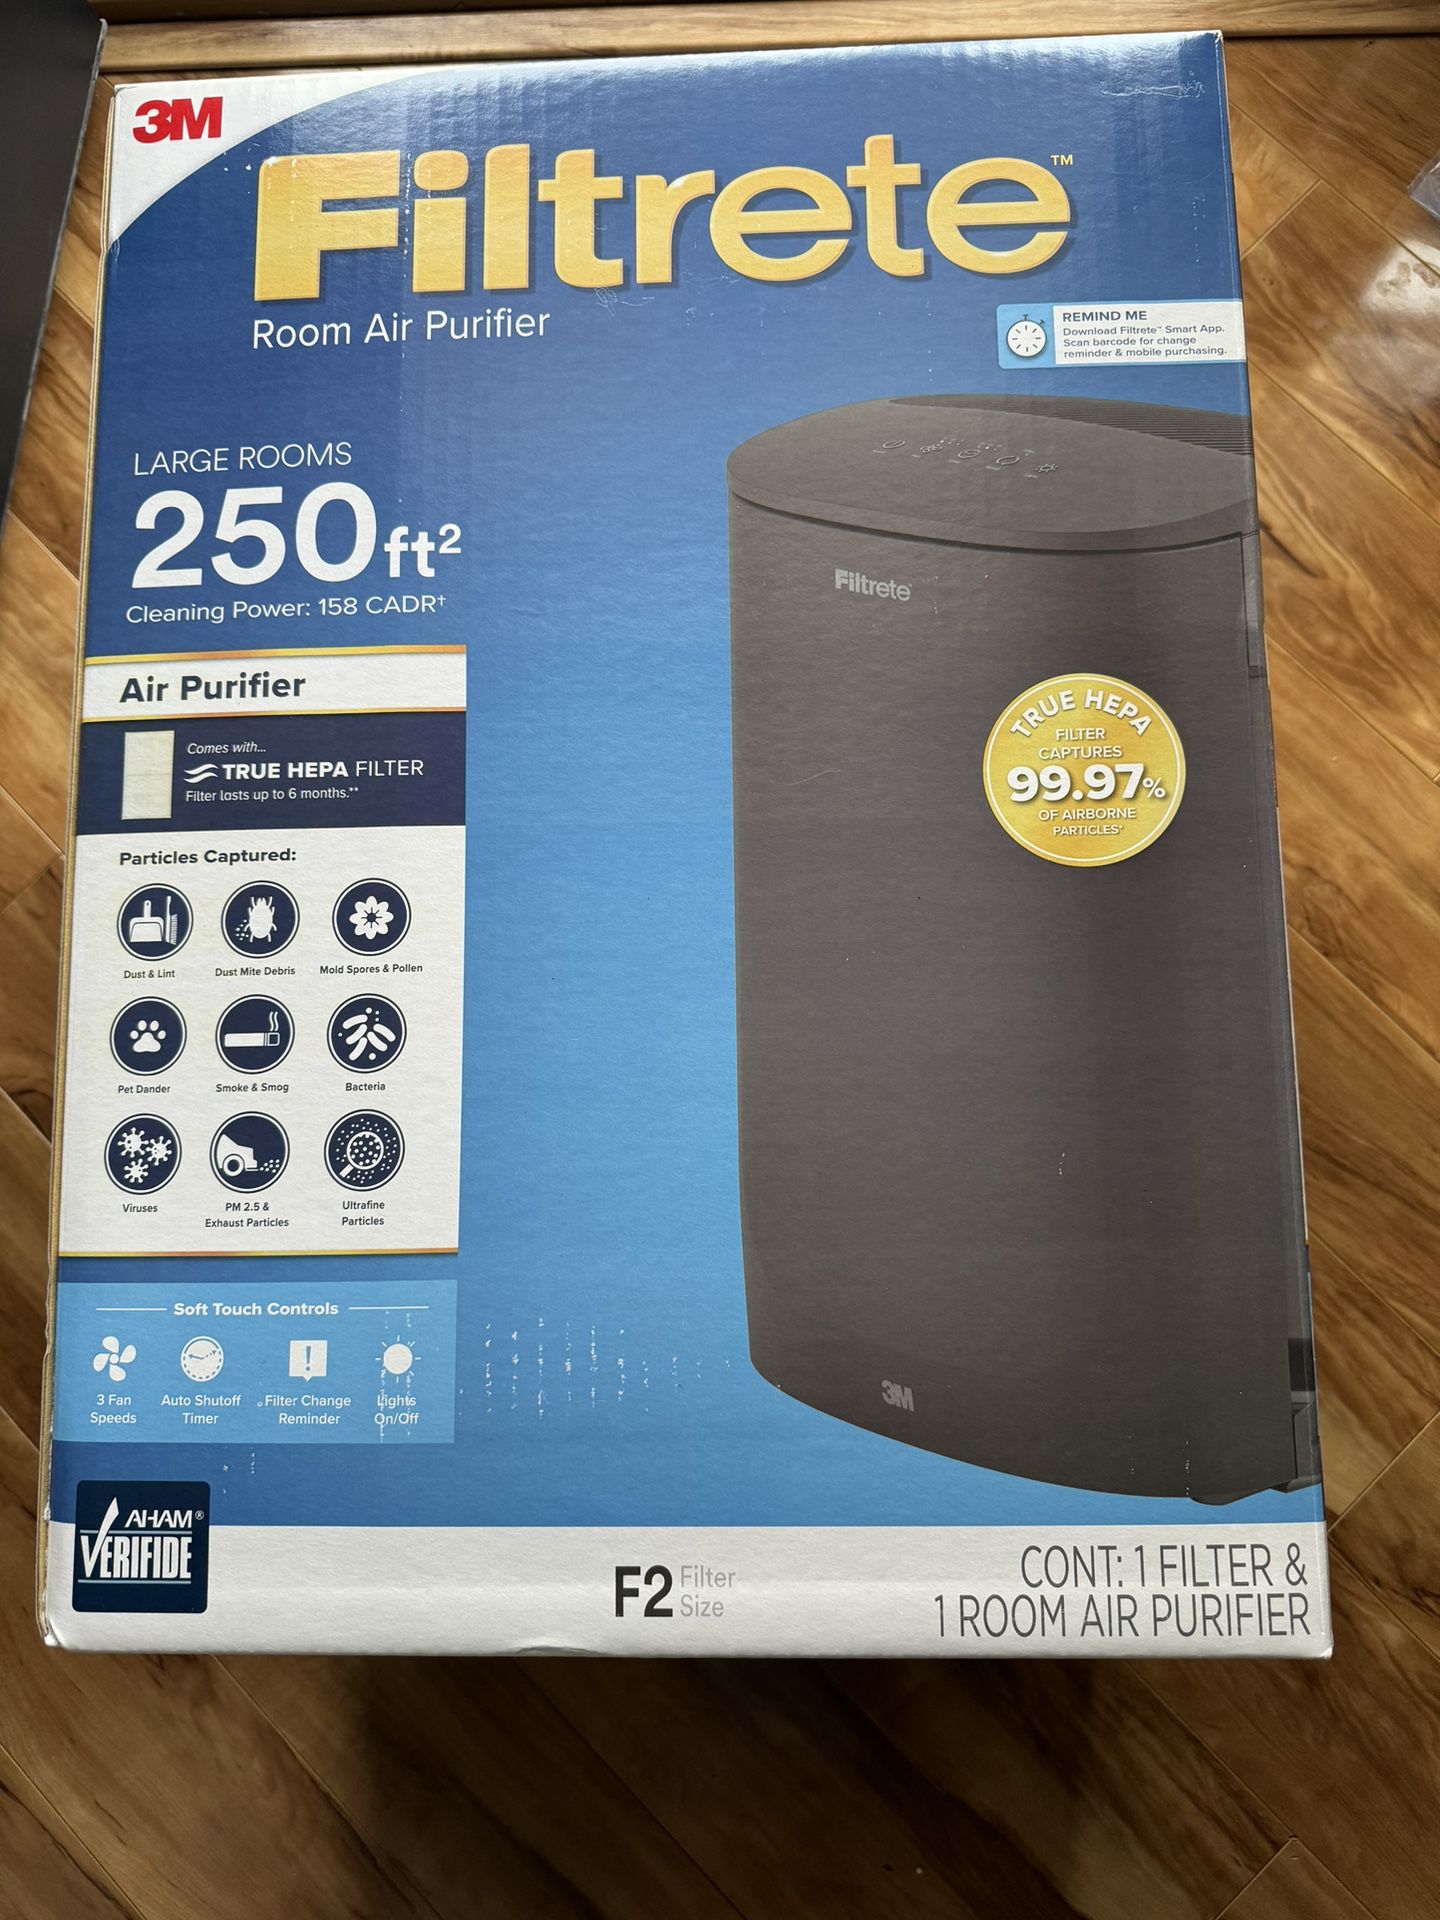 Brand New Unopened Filtrete Room Air Purifier Large Rooms 250 Ft2